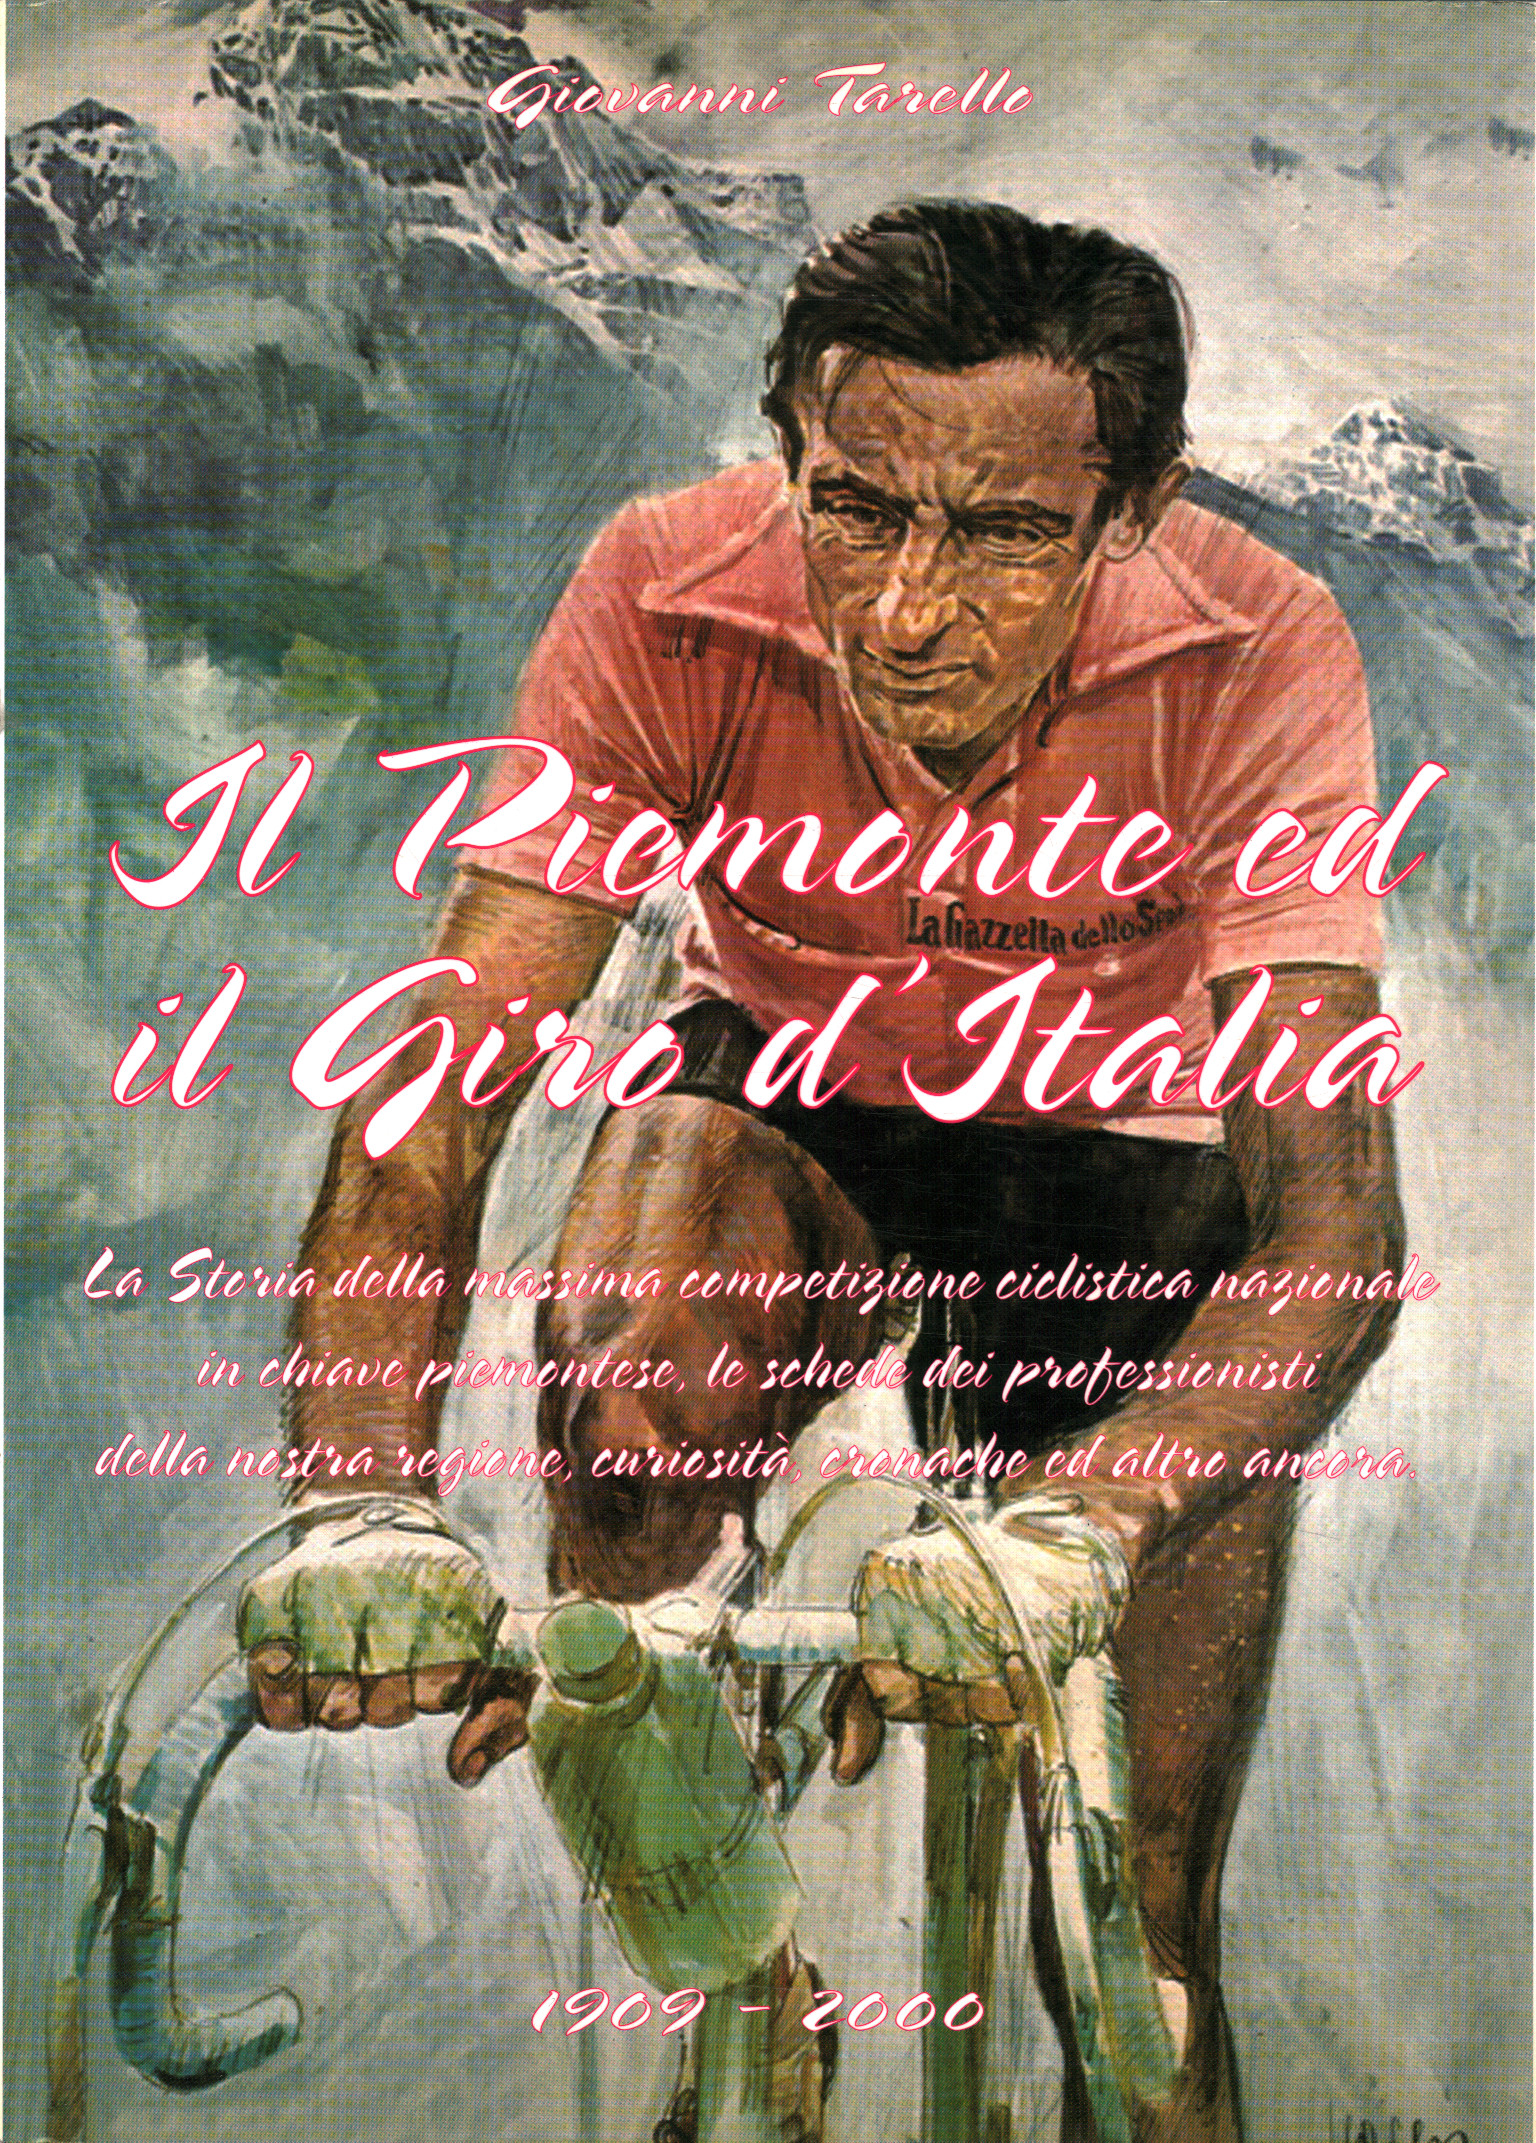 Piedmont and the Giro d'Ital